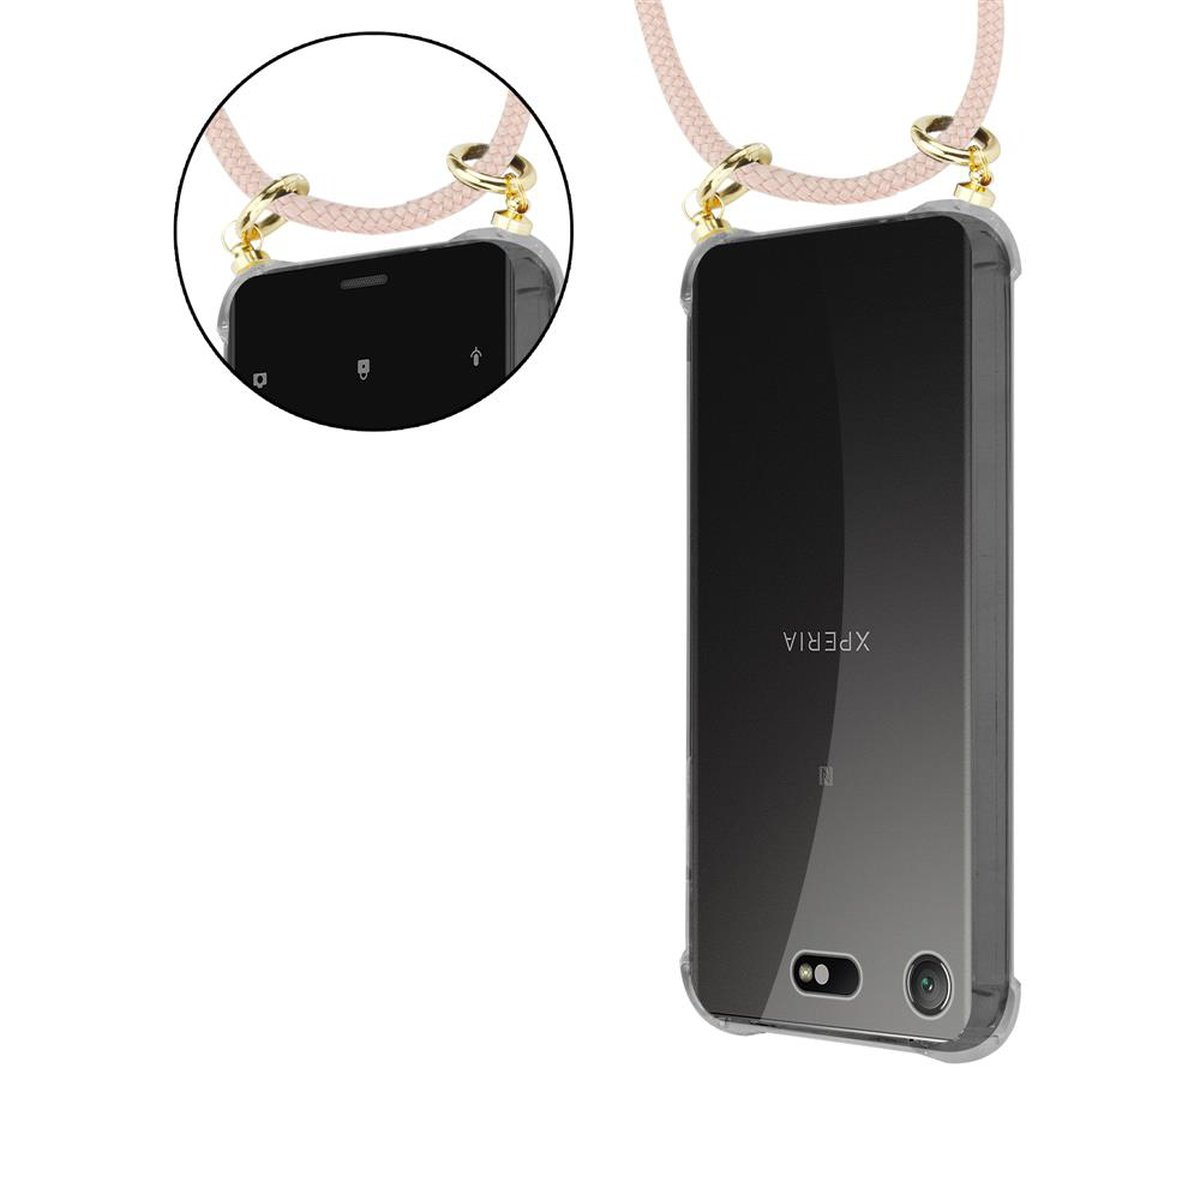 PERLIG Xperia Kette mit Sony, Gold Kordel und abnehmbarer Band Ringen, COMPACT, ROSÉGOLD Backcover, Hülle, XZ1 Handy CADORABO